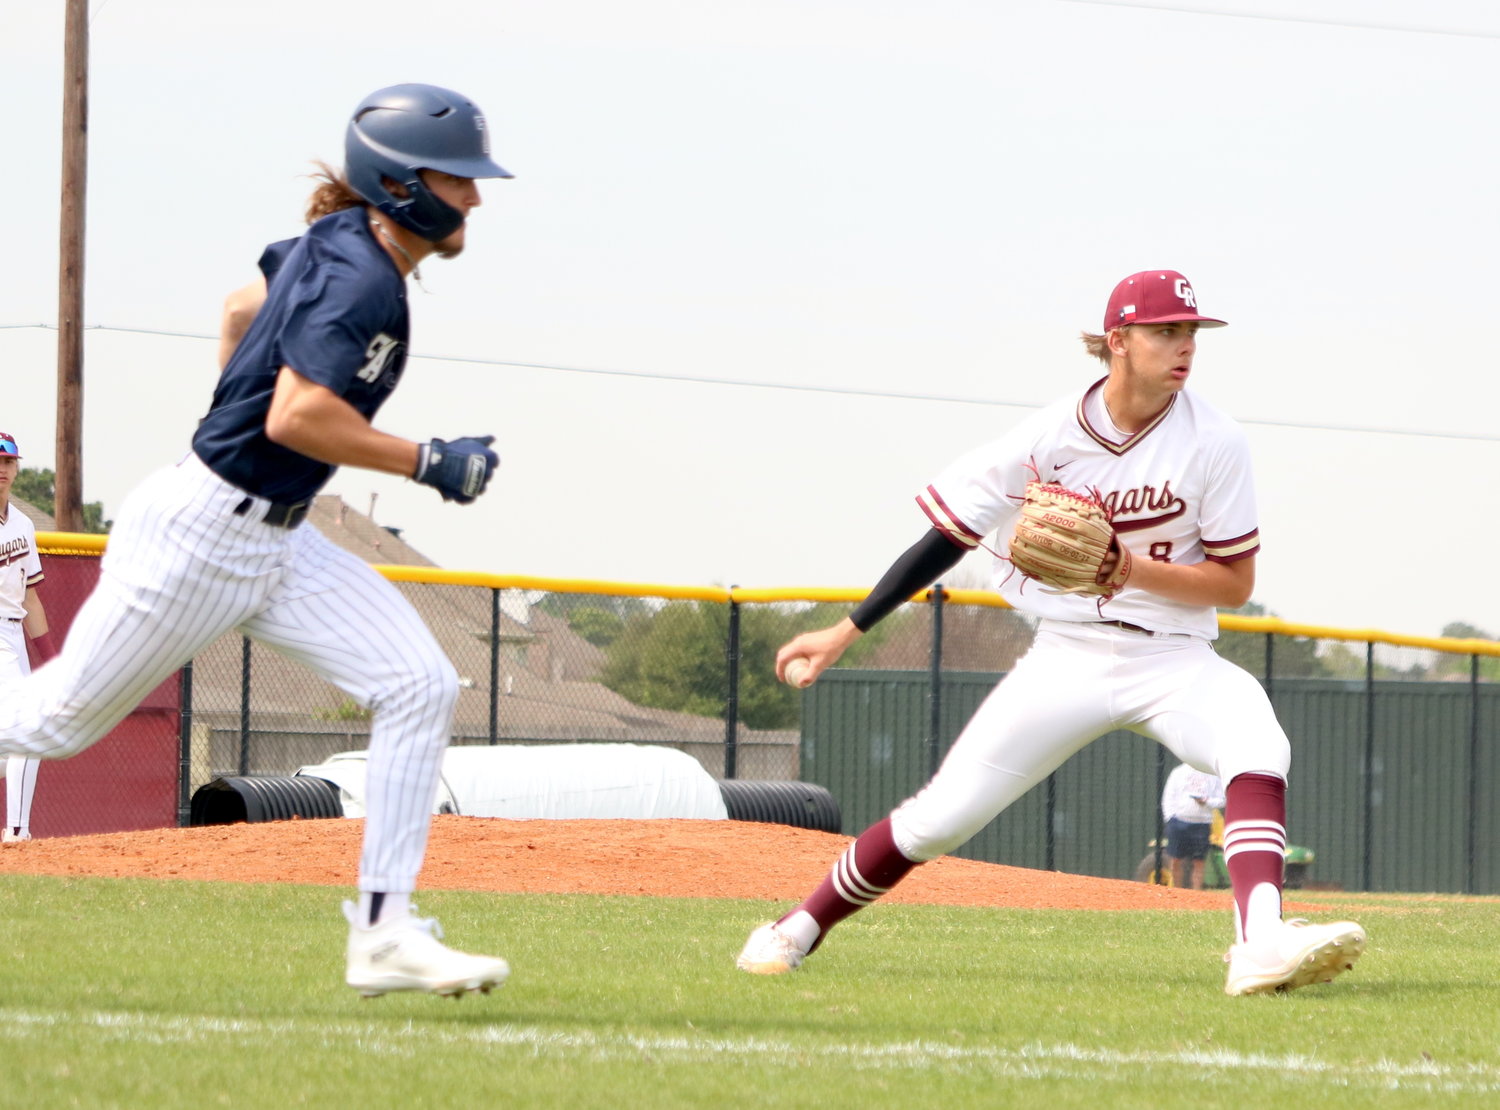 Brayden Hodge flips the ball to first base during Tuesday's game between Tompkins and Cinco Ranch at the Cinco Ranch baseball field.